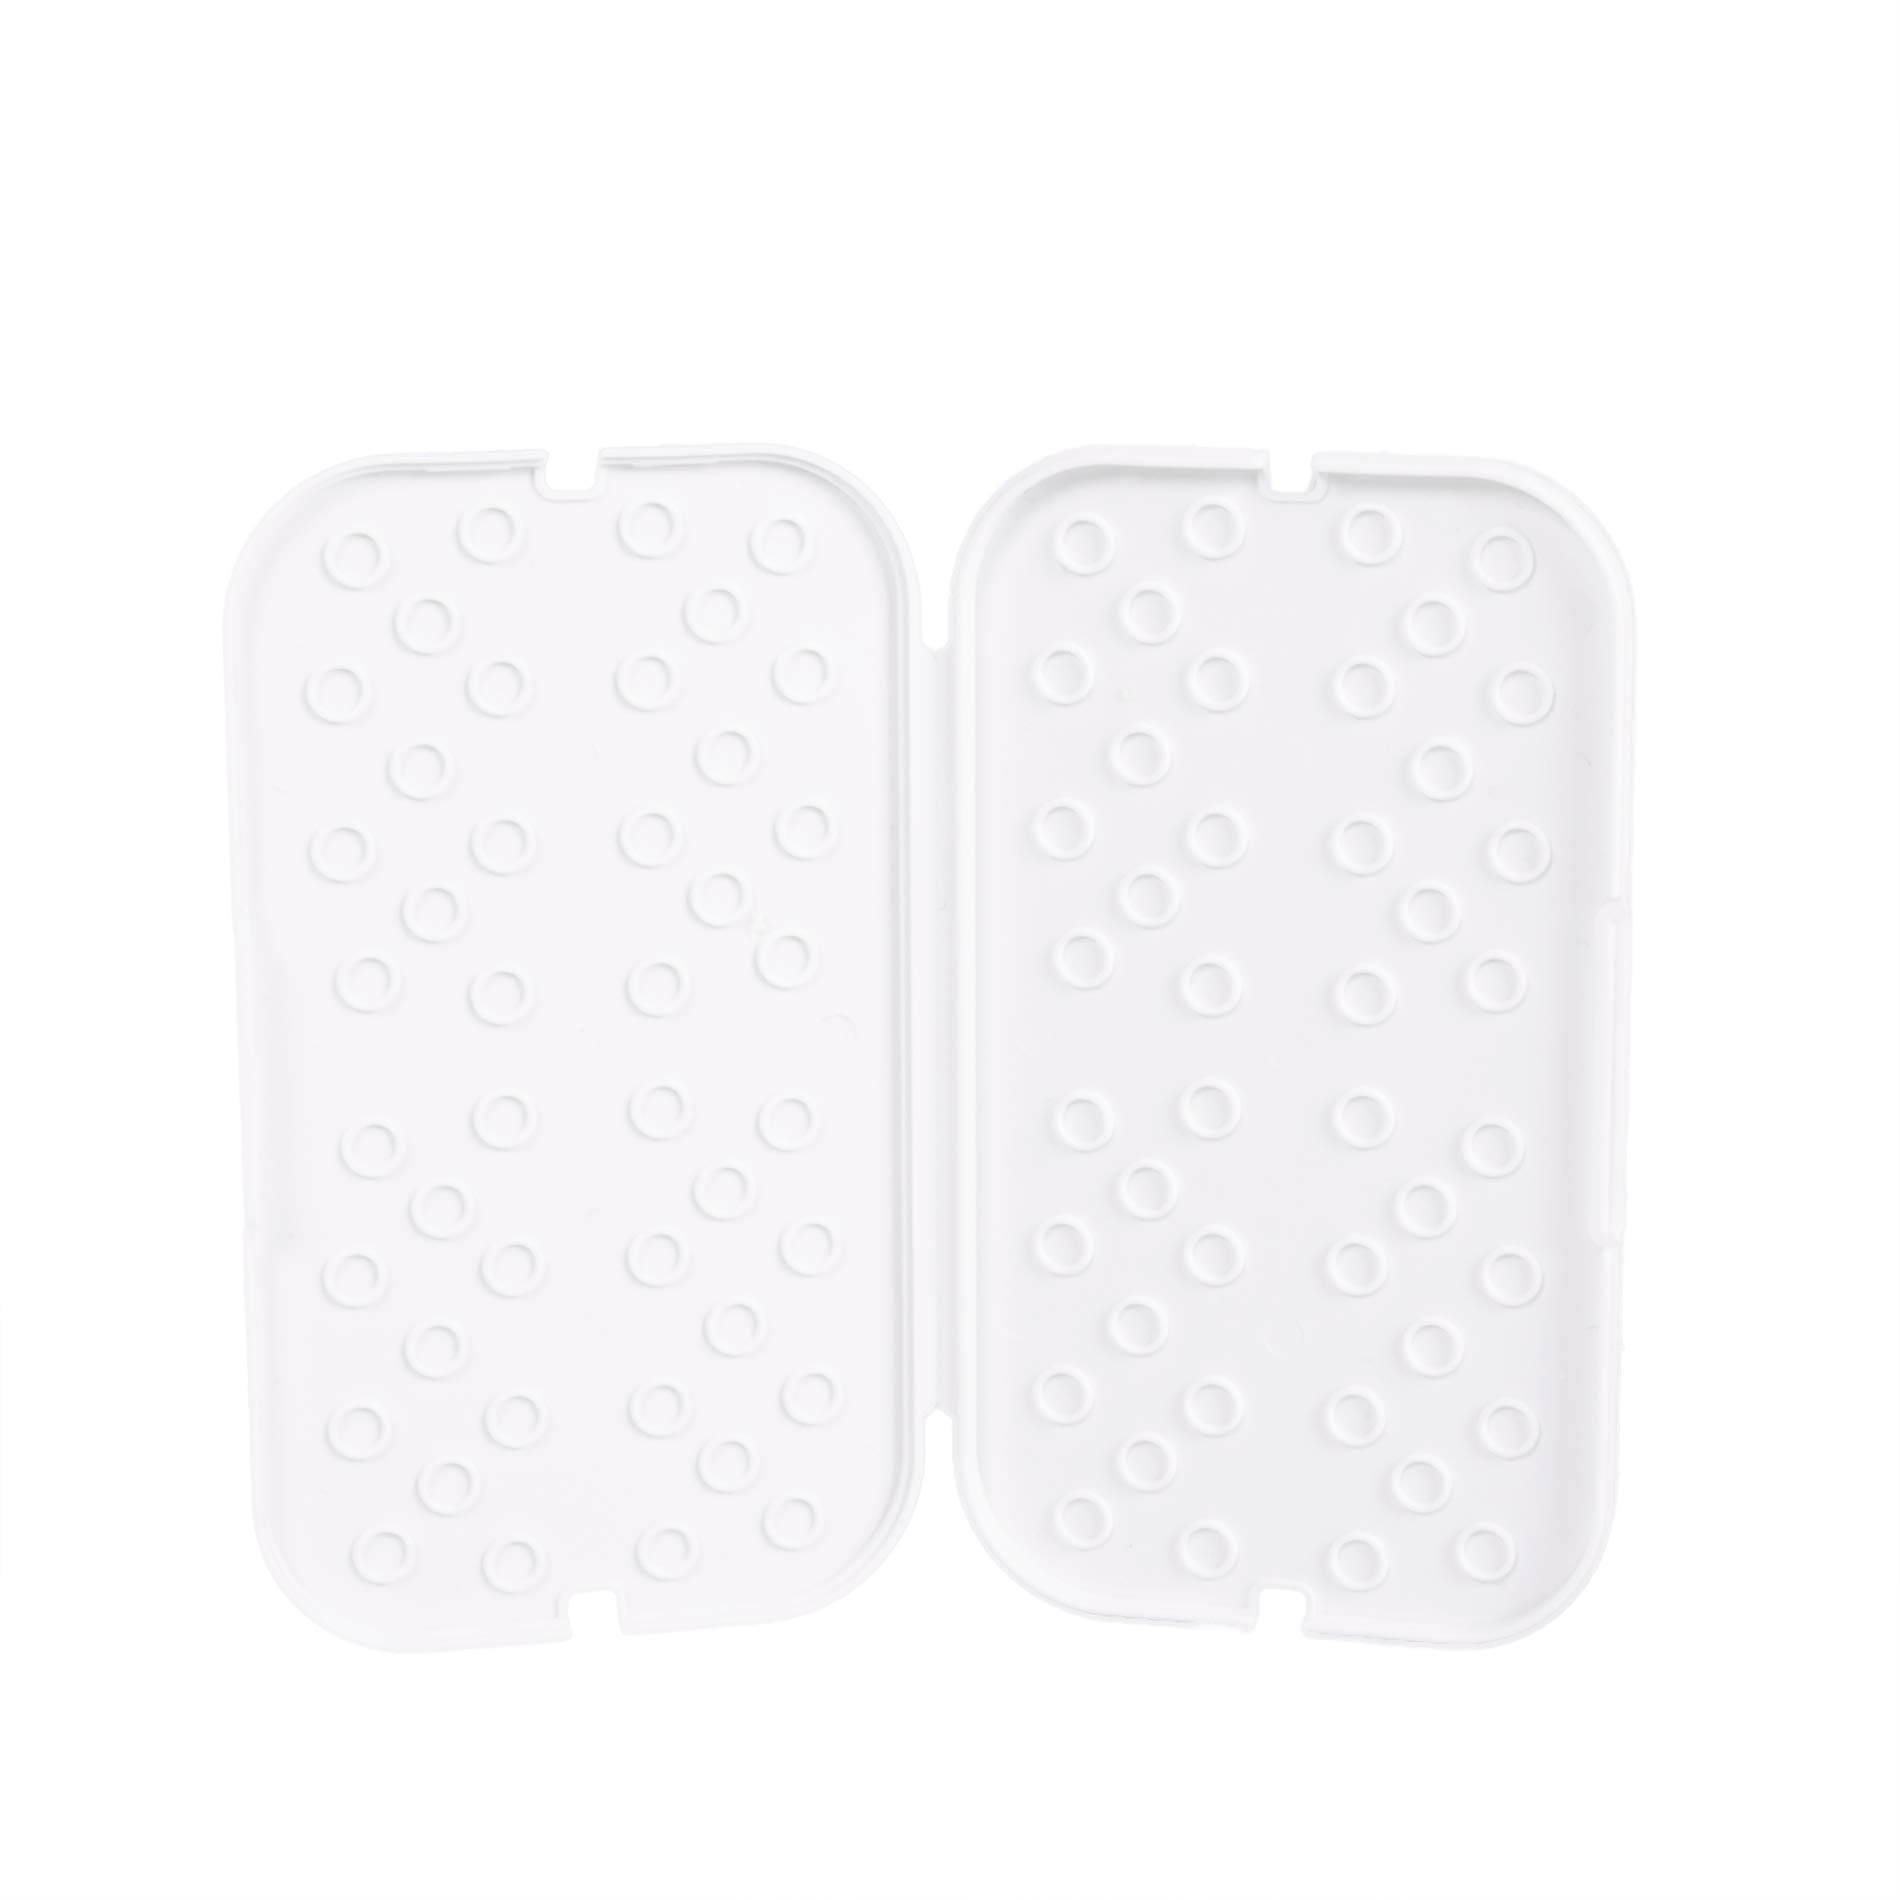 TENS 7000 TENS Unit Pad Holder, Holds (4) 2